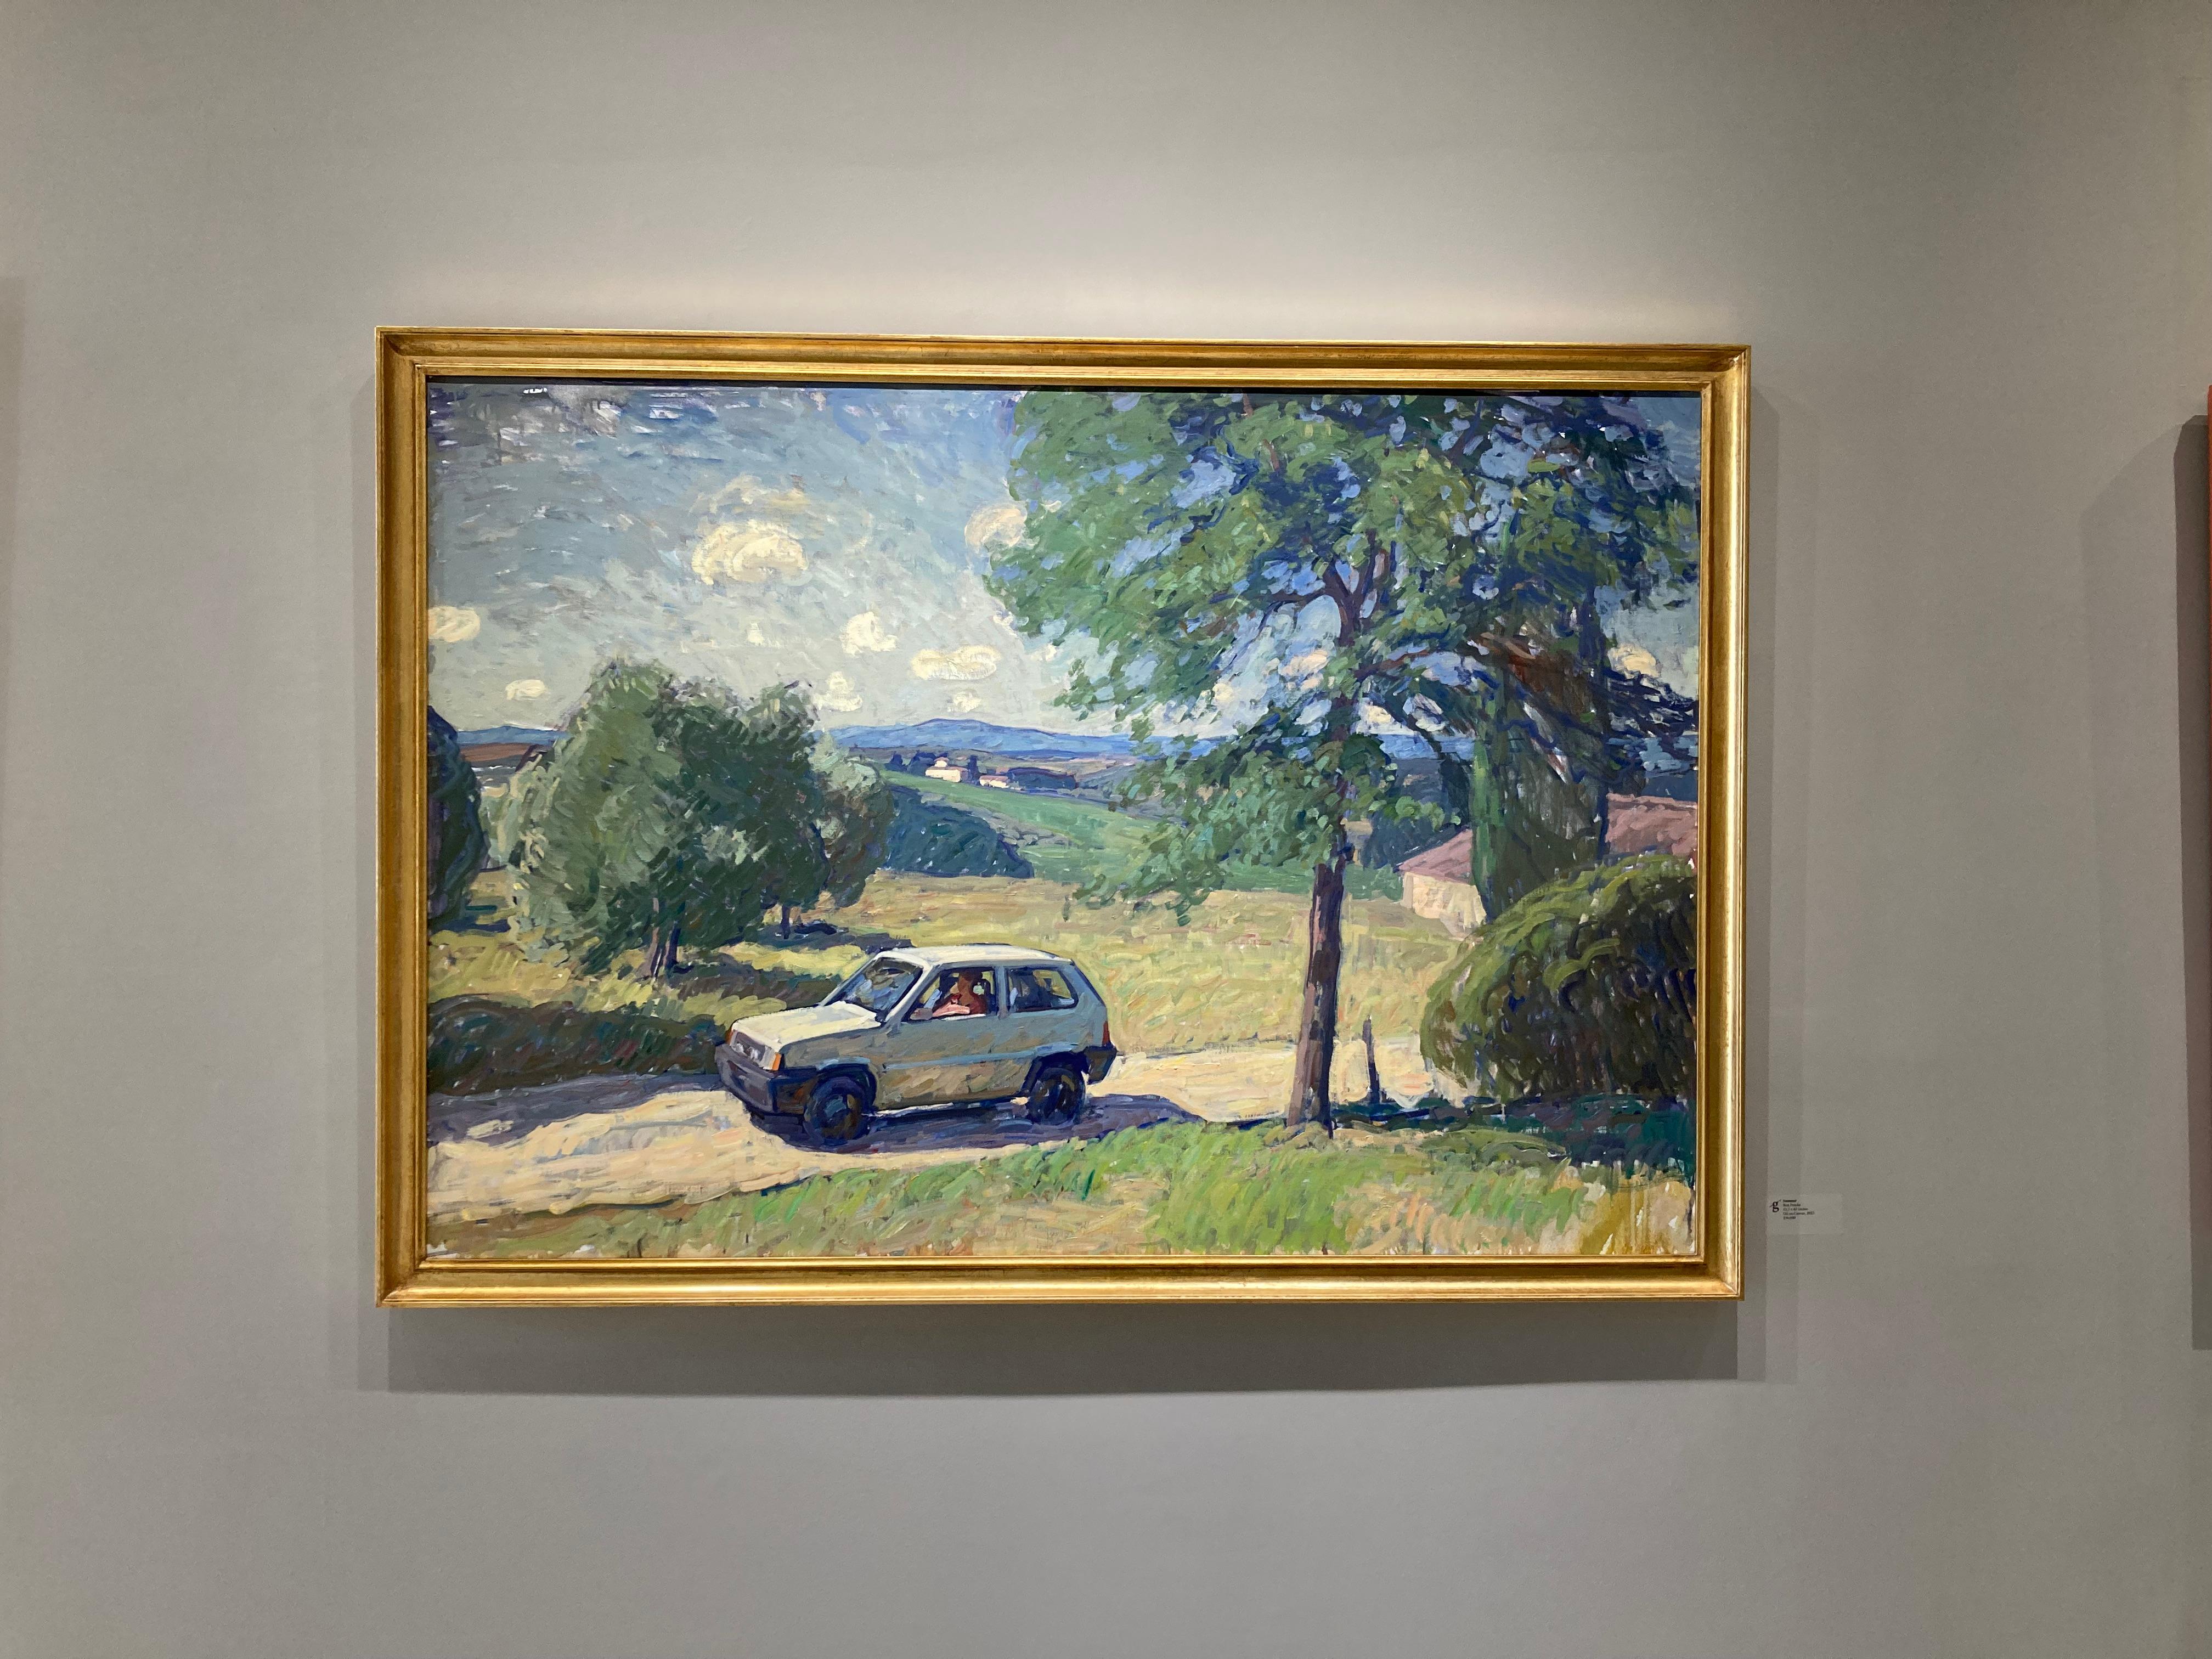 Tuscan Summer is preserved in this Neo impressionist style oil painting. A woman in a Fiat drives along the dirt road with the windows down, enjoying the fresh air. The landscape incorporates green trees, grassy meadows, and distant hills. A blue